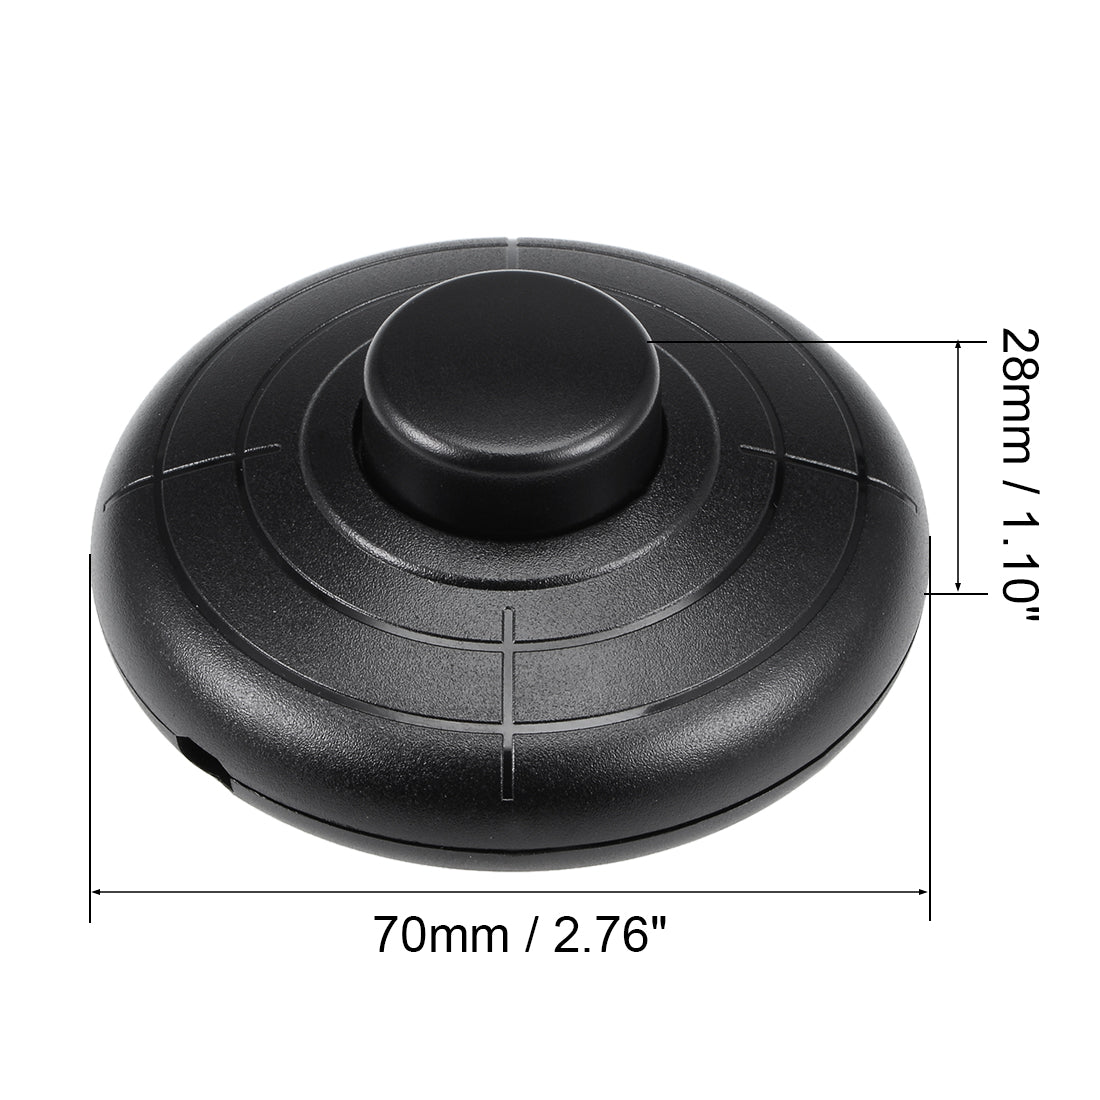 Uxcell Uxcell Pedal Push Button Switch, Round Lamp Lights Foot Control Momentary Footswitch Black, Momentary